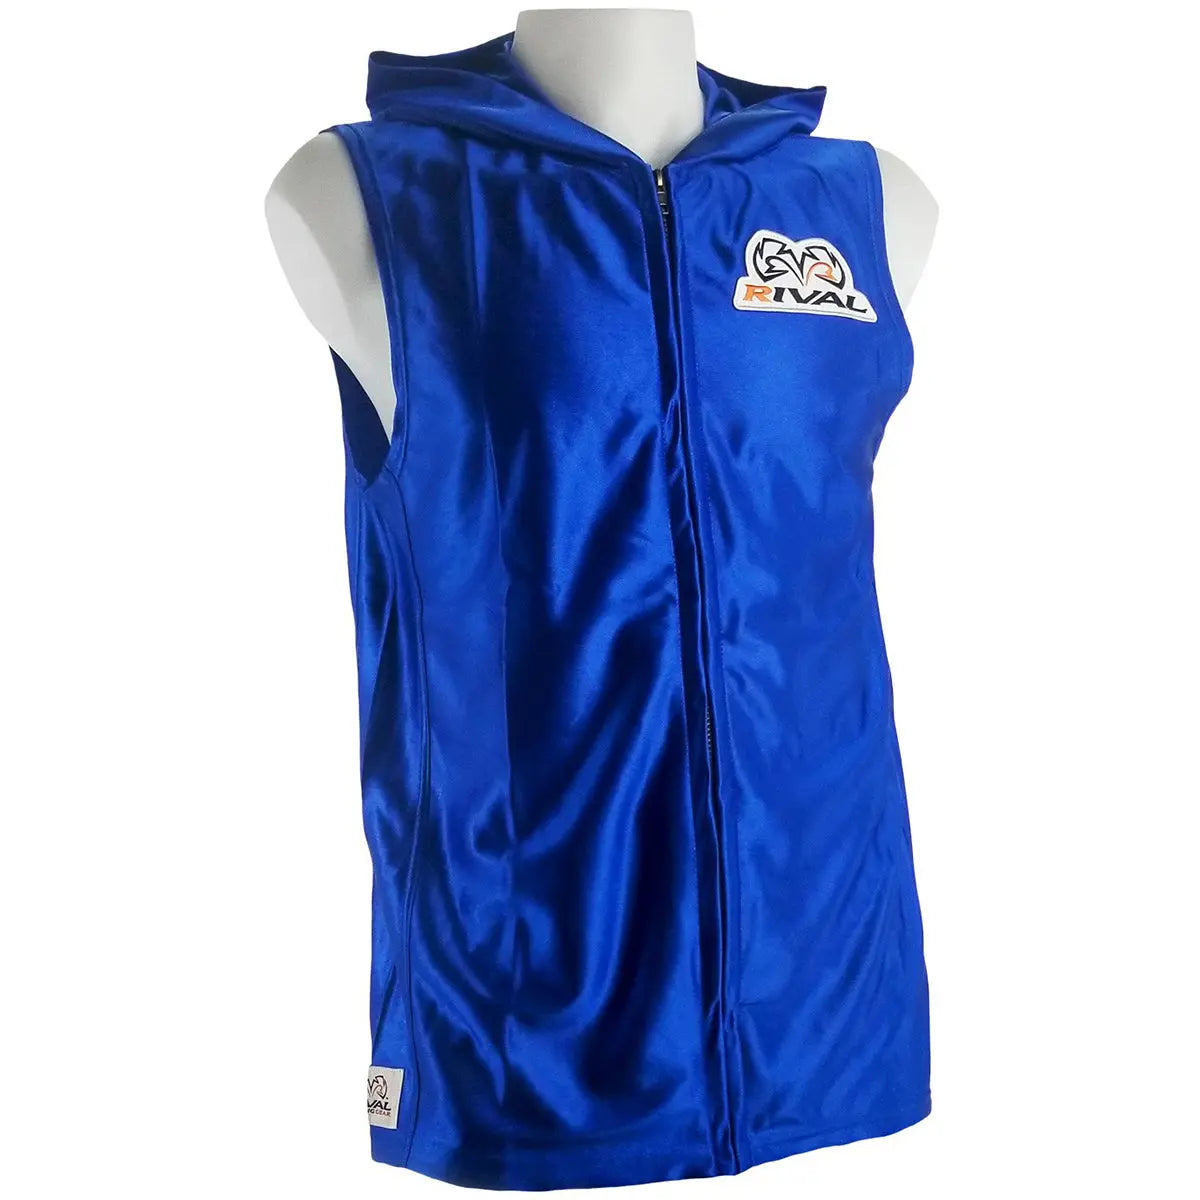 Rival Boxing Dazzle Traditional Sleeveless Ring Jacket with Hood RIVAL